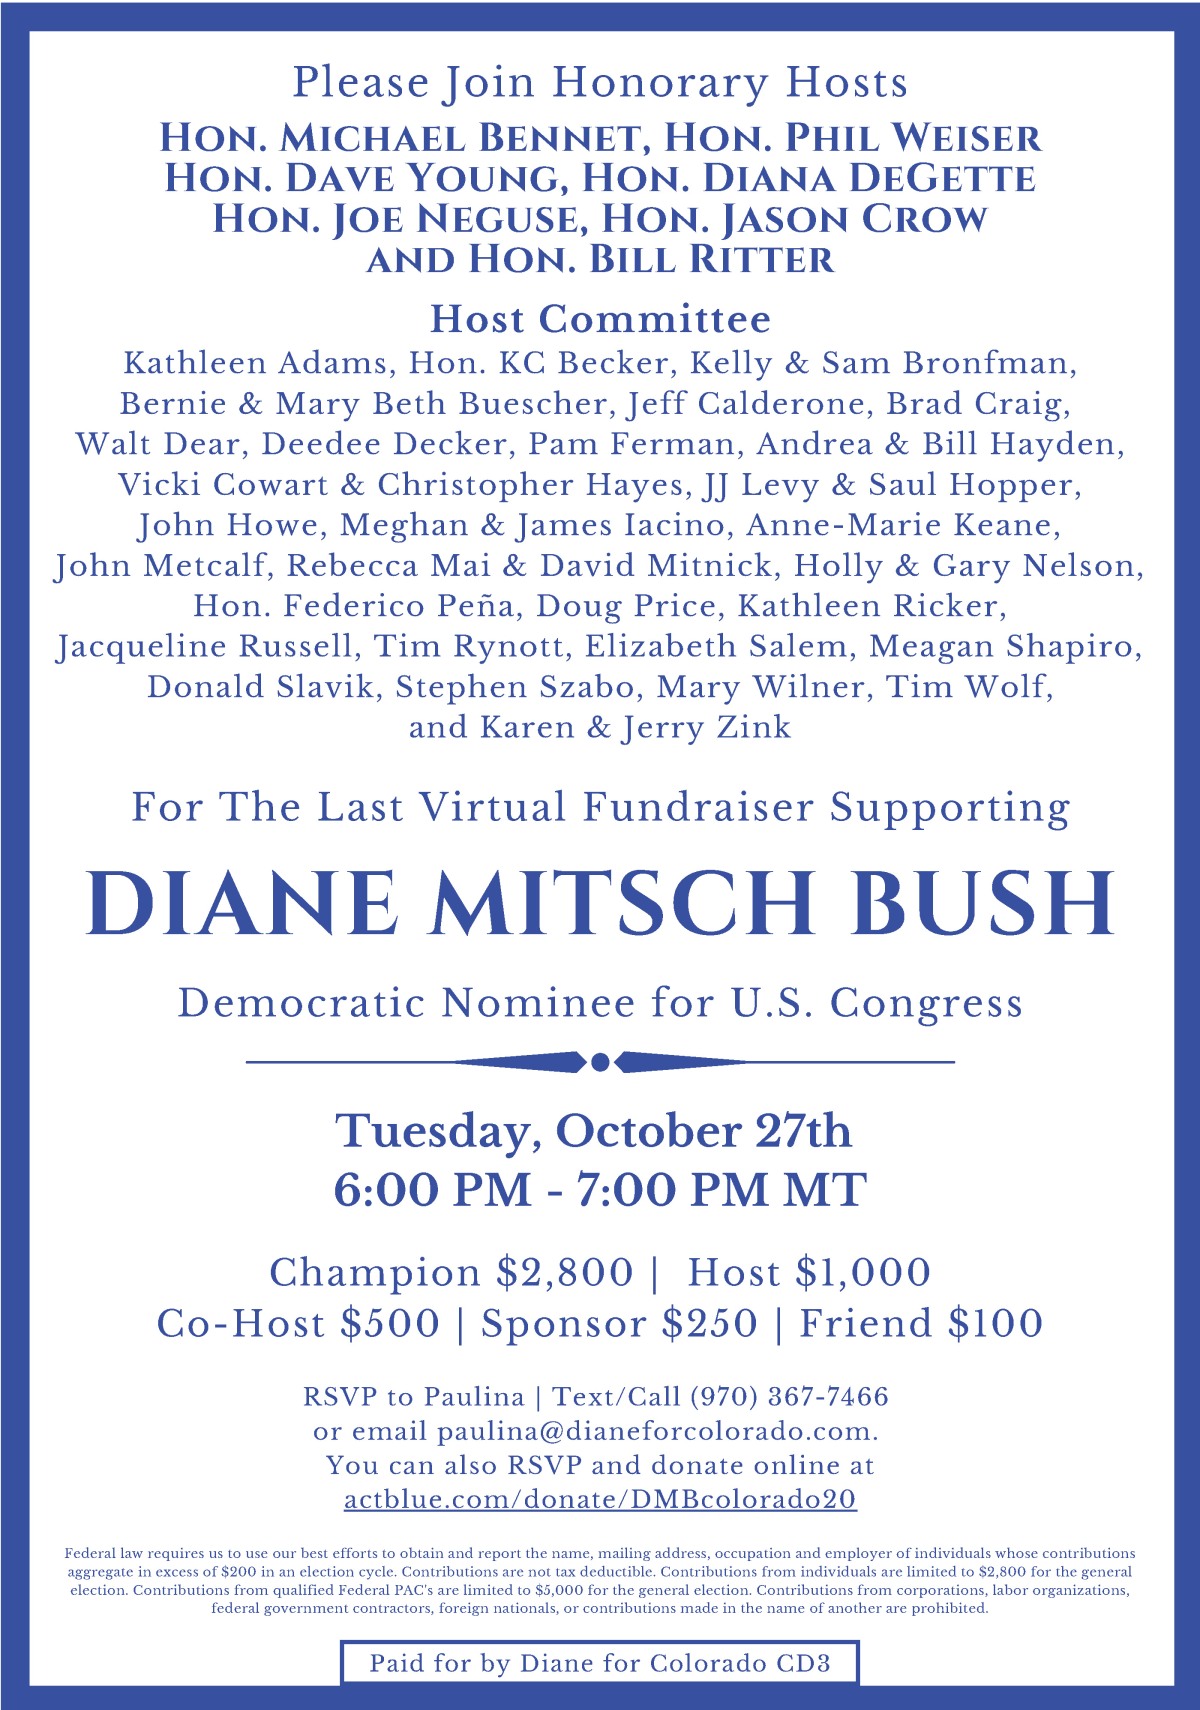 Diane Mitsch Bush Fundraiser | Tuesday, October 27, 2020 (Click to print or download invitation)